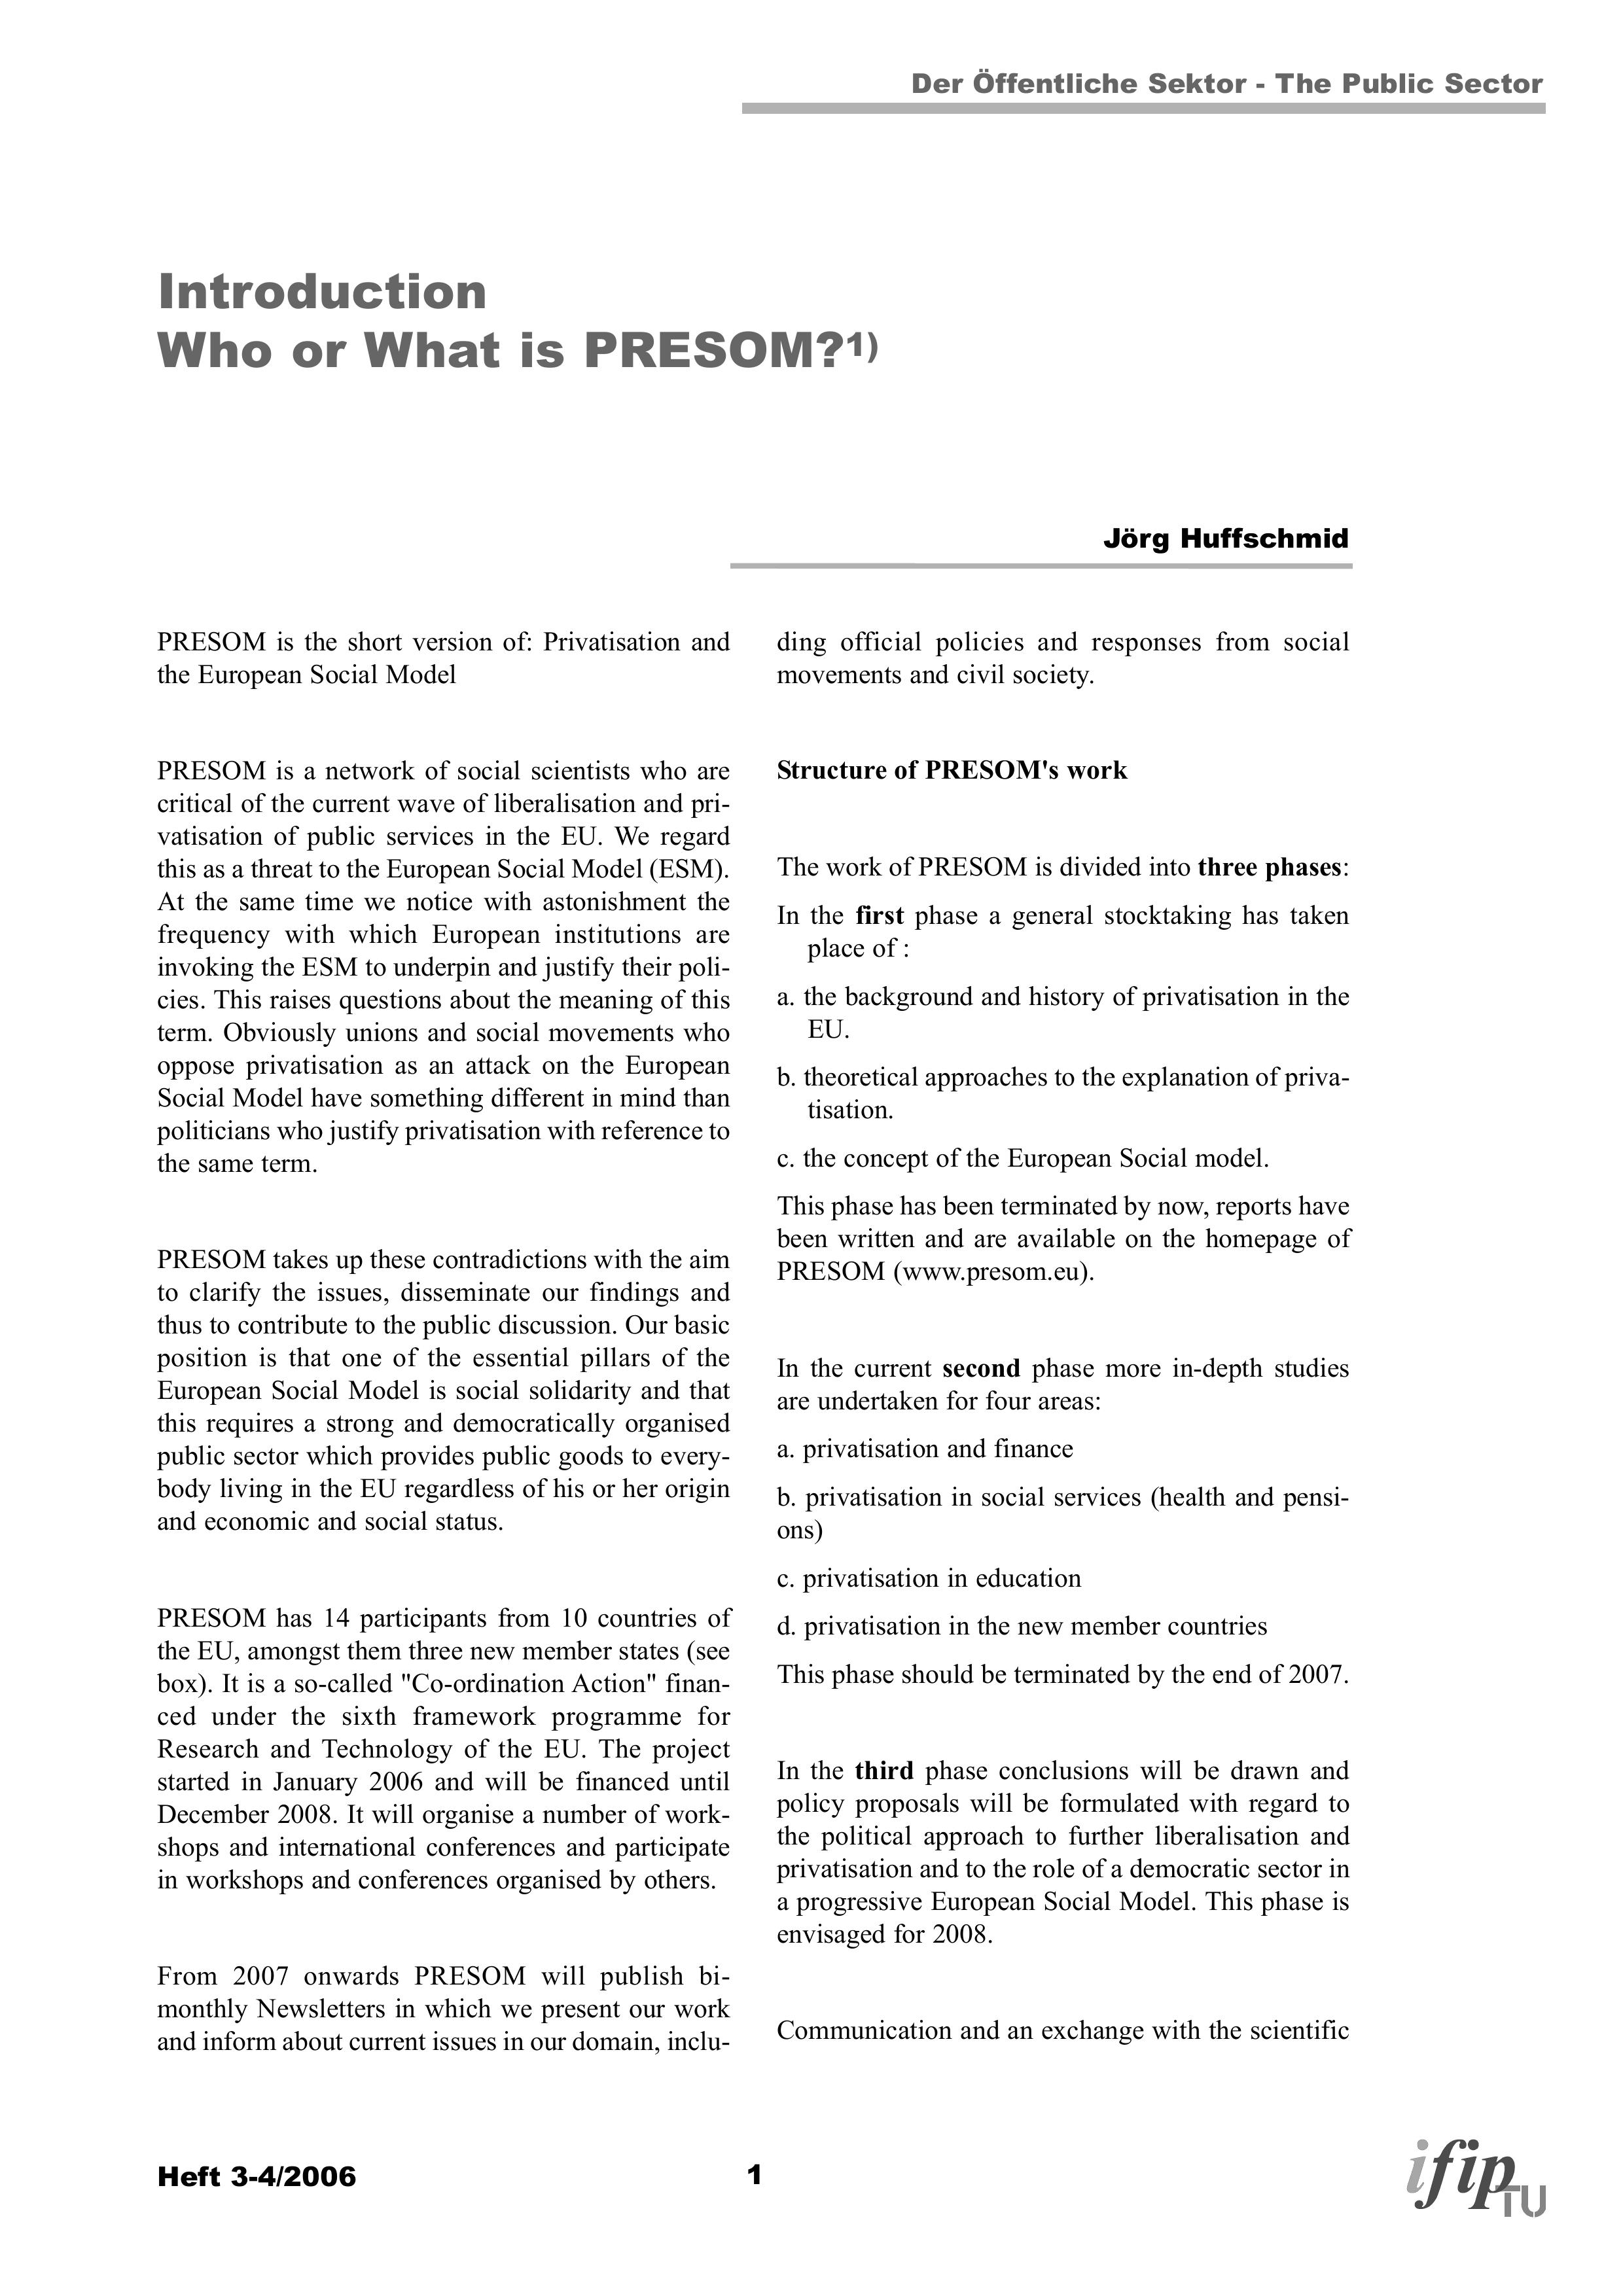 Introduction: Who or What is PRESOM?